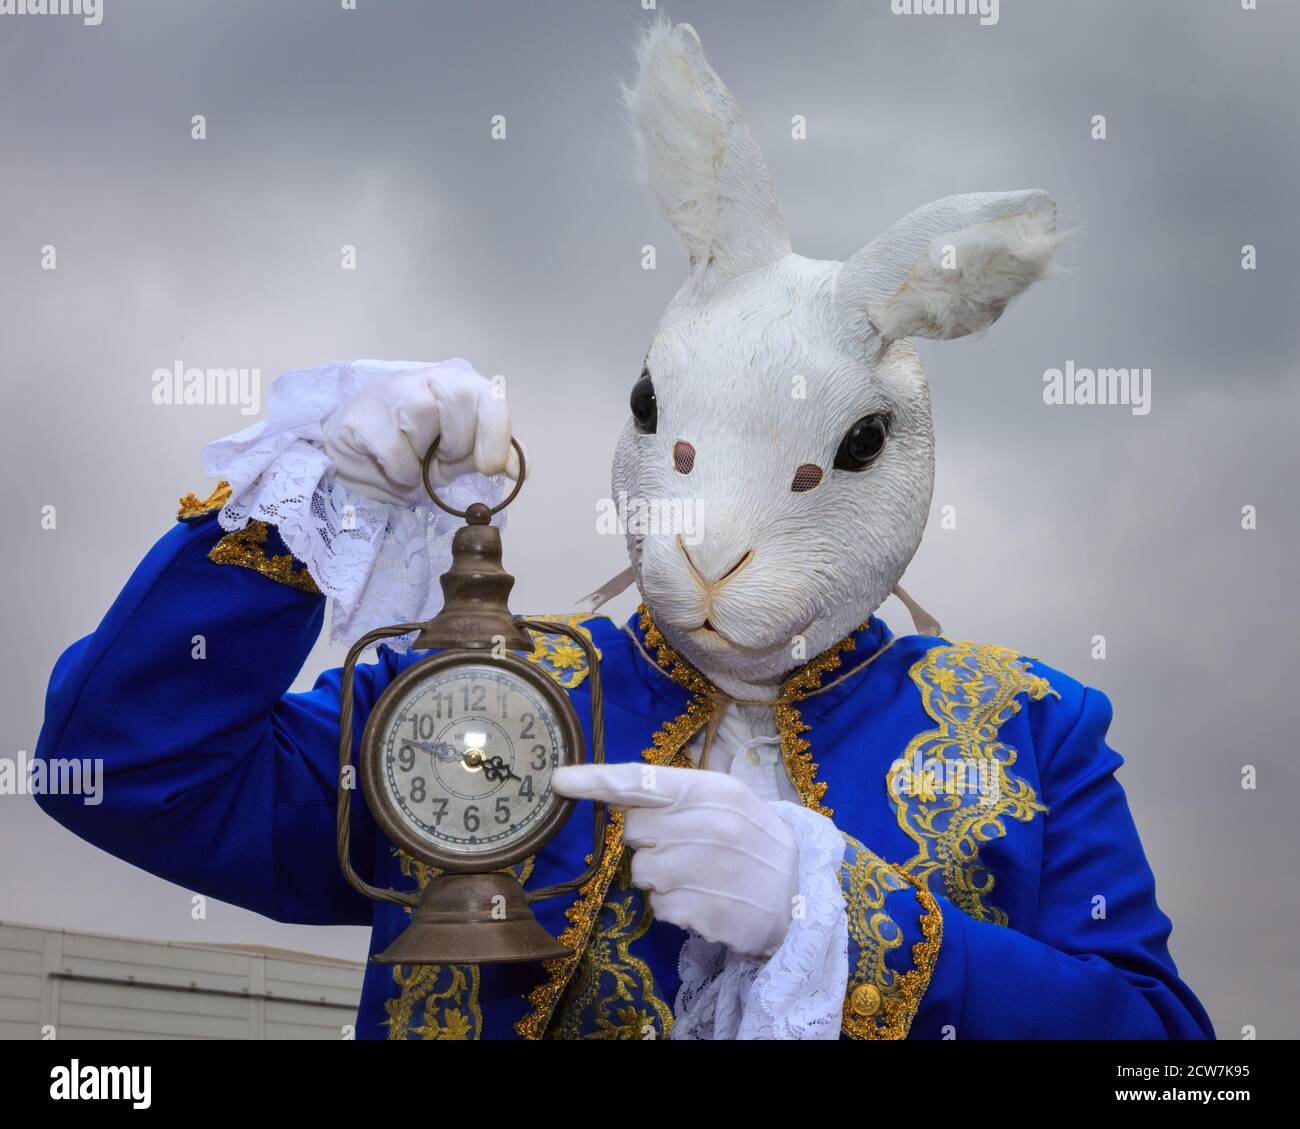 A cosplayer as the White Rabbit from Alice in Wonderland character poses at MCM Comicon London, UK Stock Photo